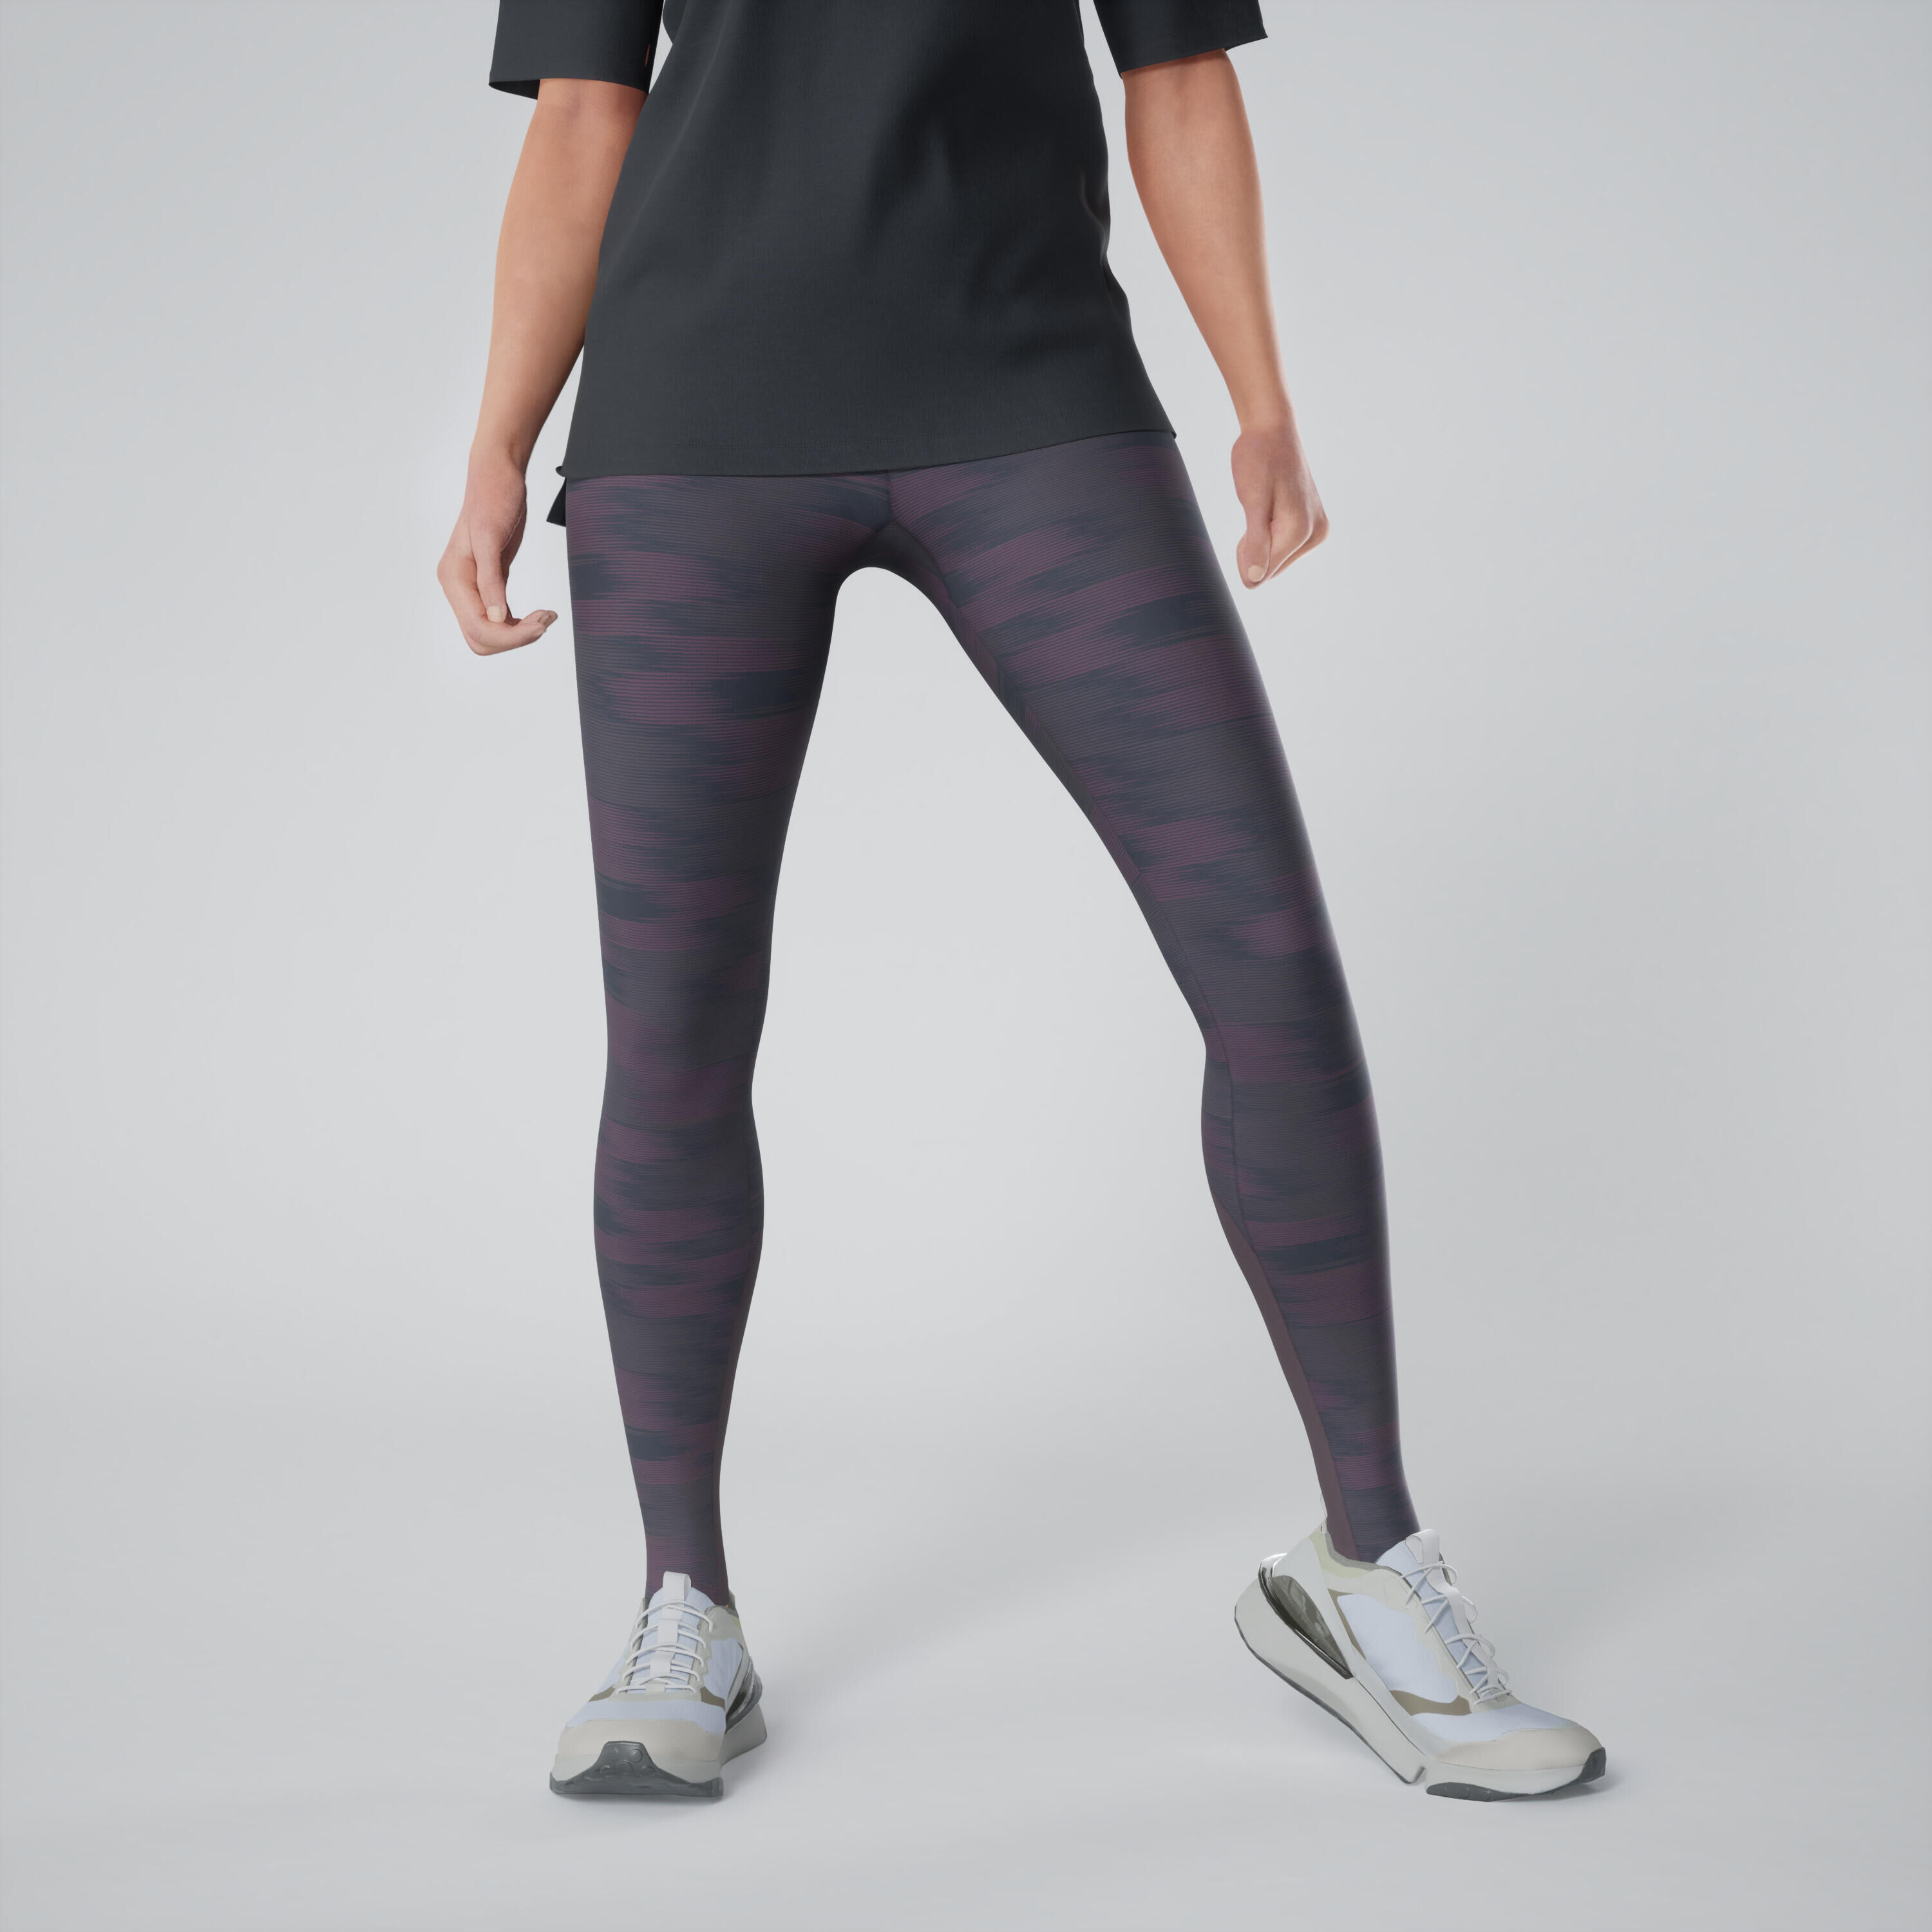 DOMYOS Stretchy High-Waisted Cotton Fitness Leggings - Print